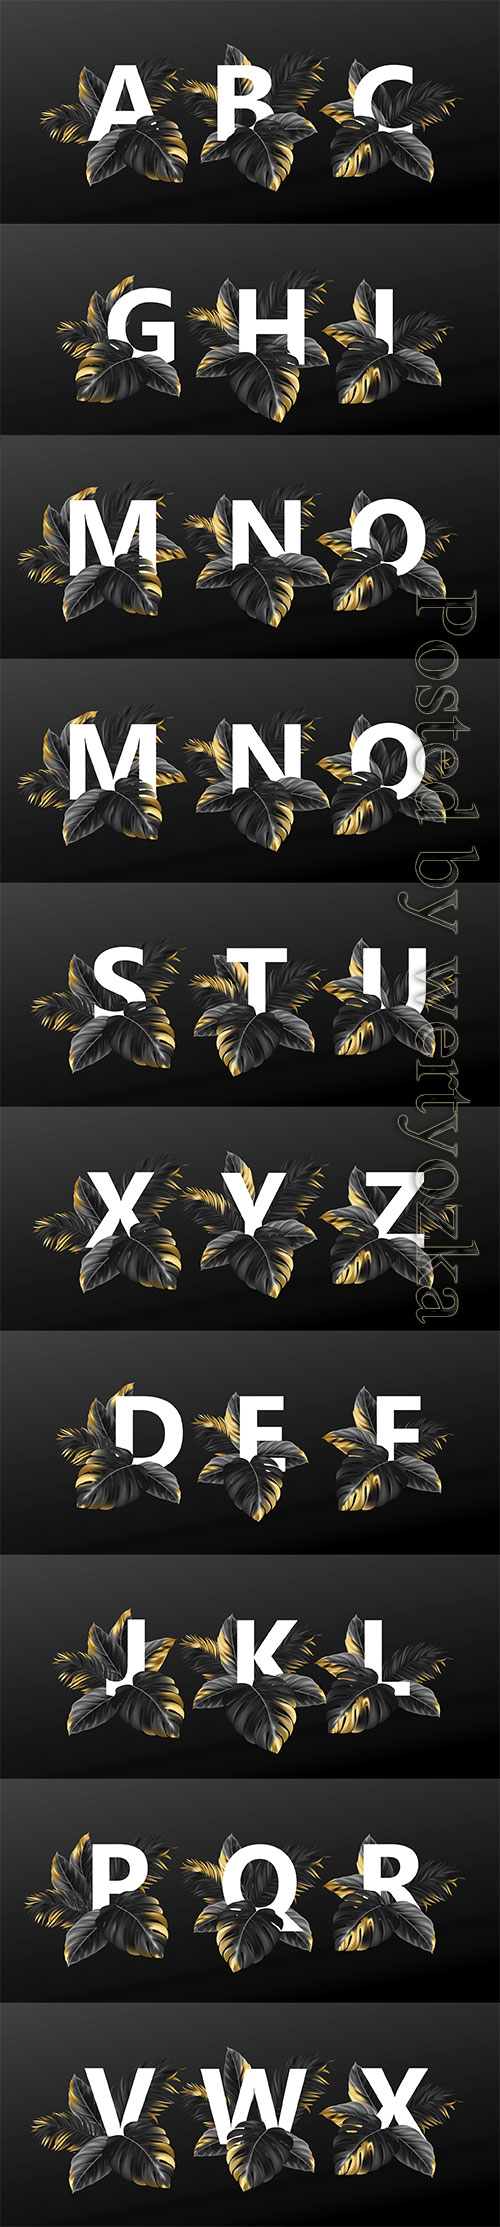 Alphabet letters in black with golden exotic tropical leaves of plants